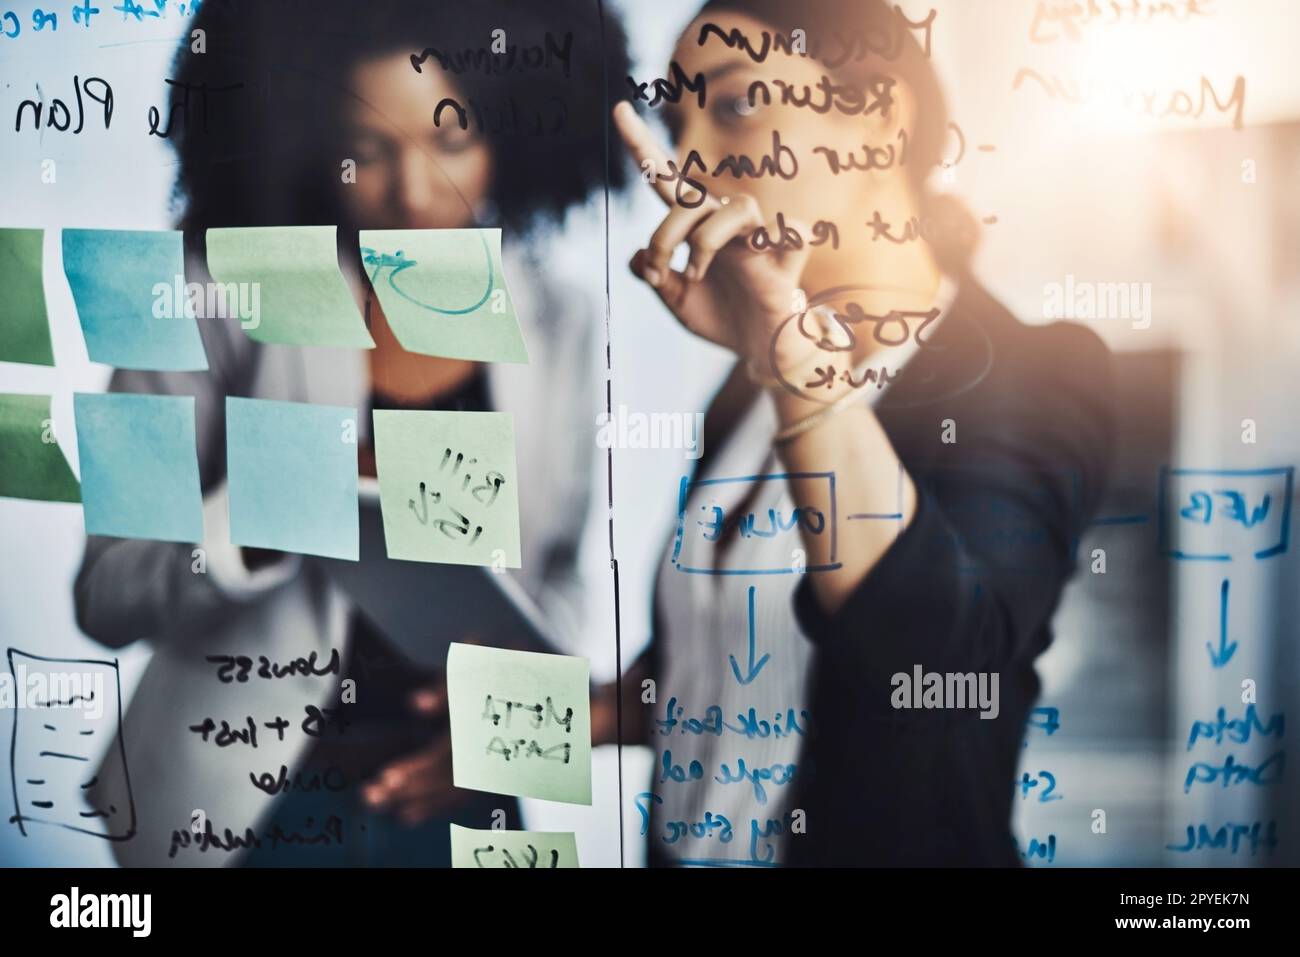 They understand where the bigger picture lies. two businesswomen brainstorming with notes on a glass wall in an office. Stock Photo